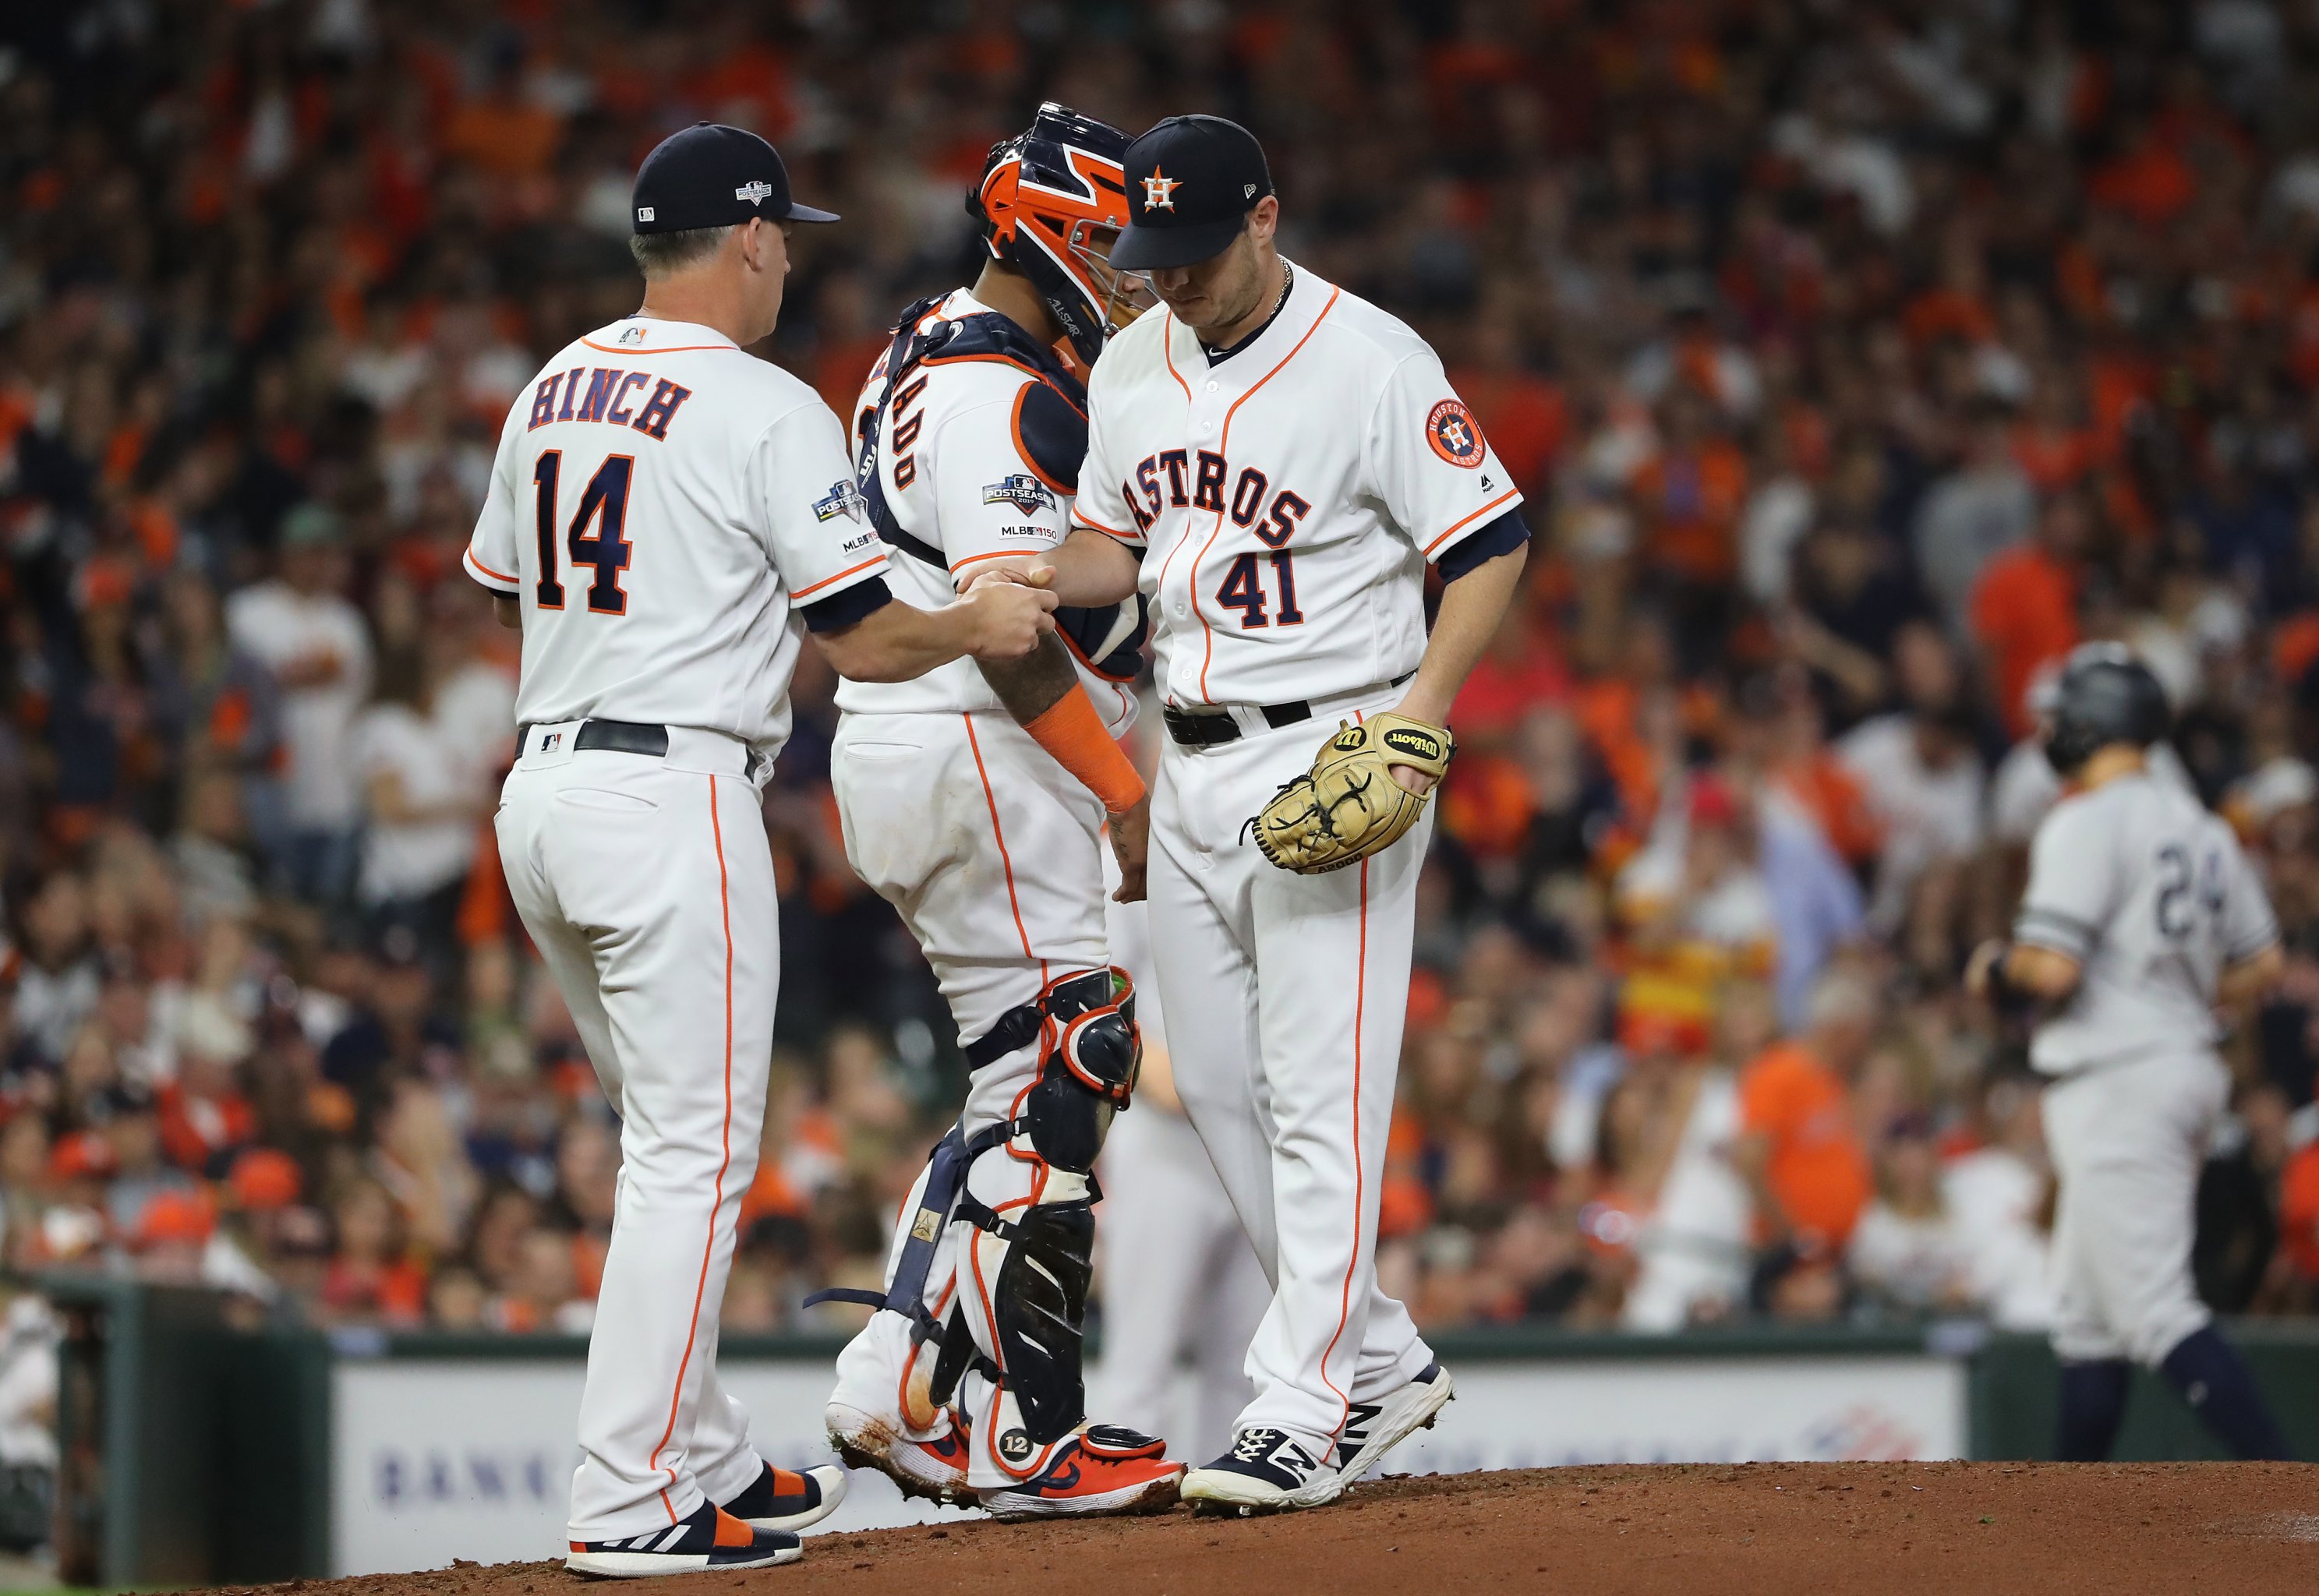 VIDEO: Jose Altuve Sends Astros to World Series With Epic Walk-Off